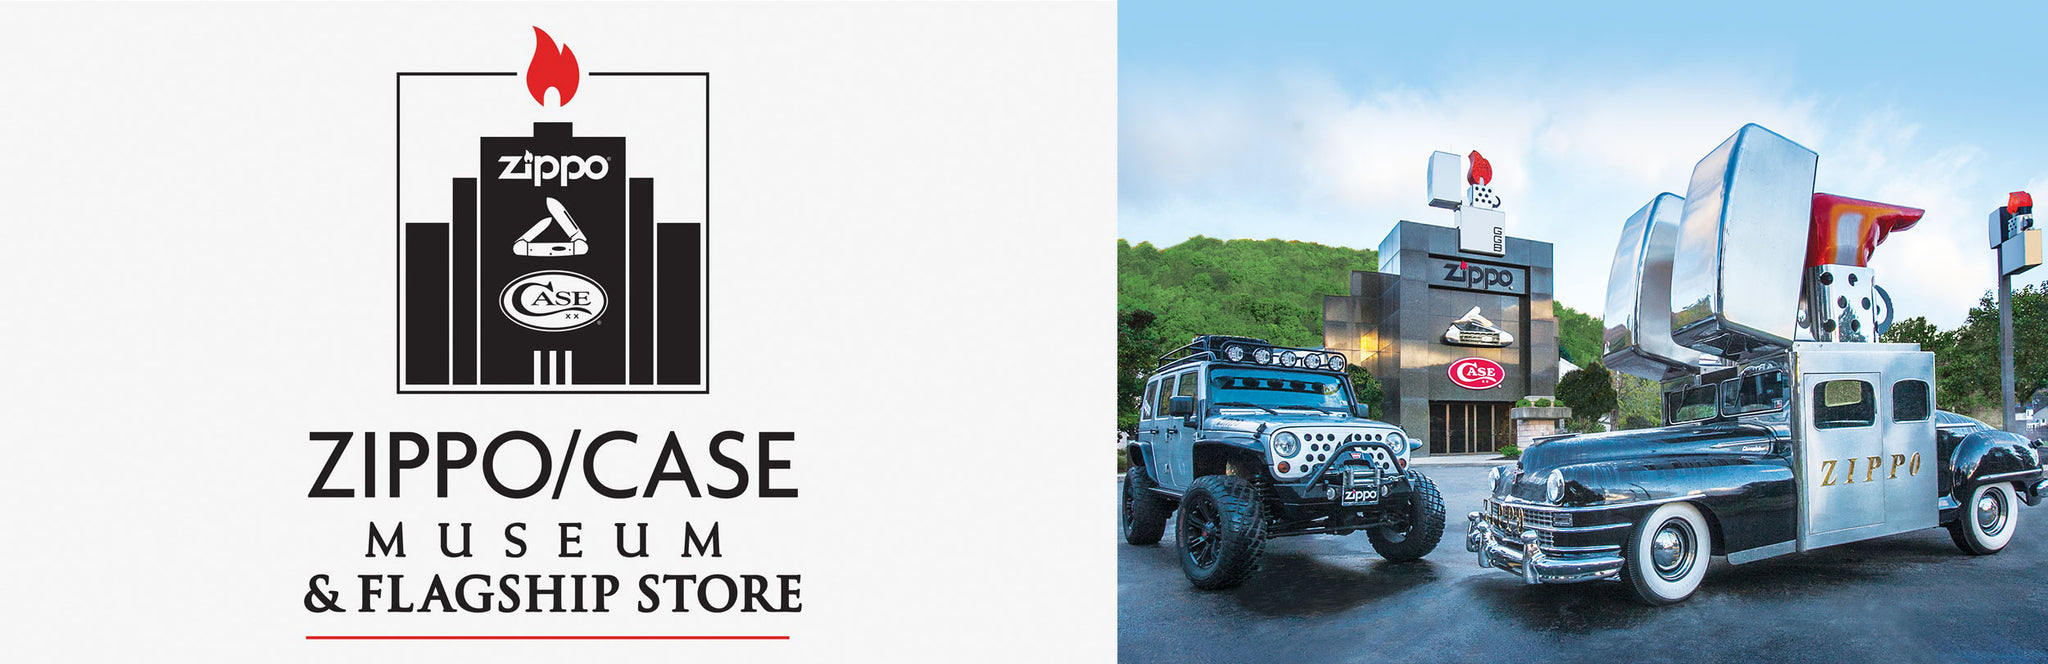 Zippo/Case Museum logo with image of the Zippo Jeep and Zippo Car.